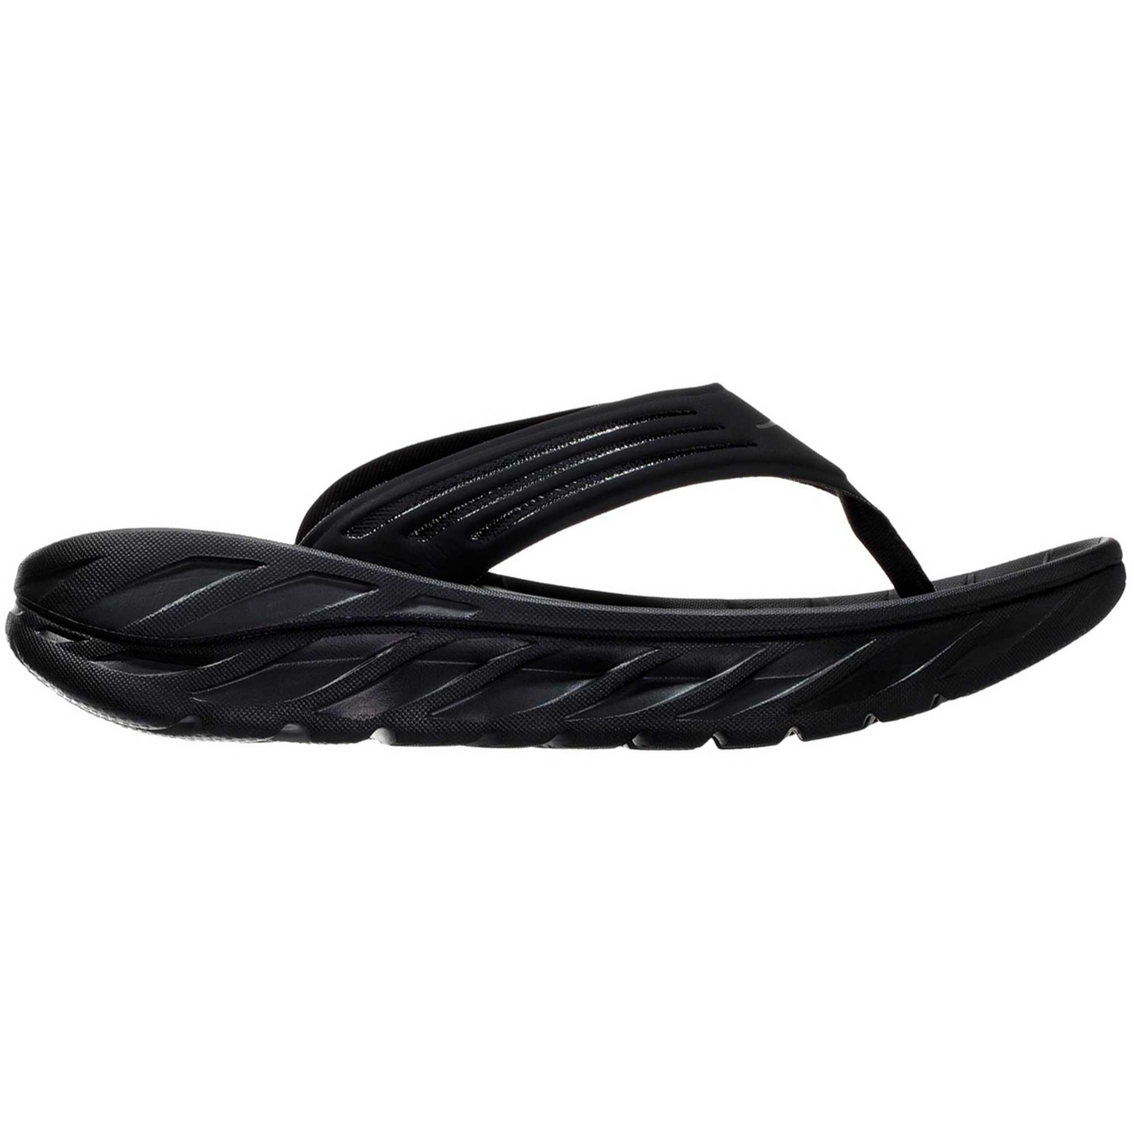 Hoka Men's Ora Recovery Flip Flop Shoes - Image 2 of 6